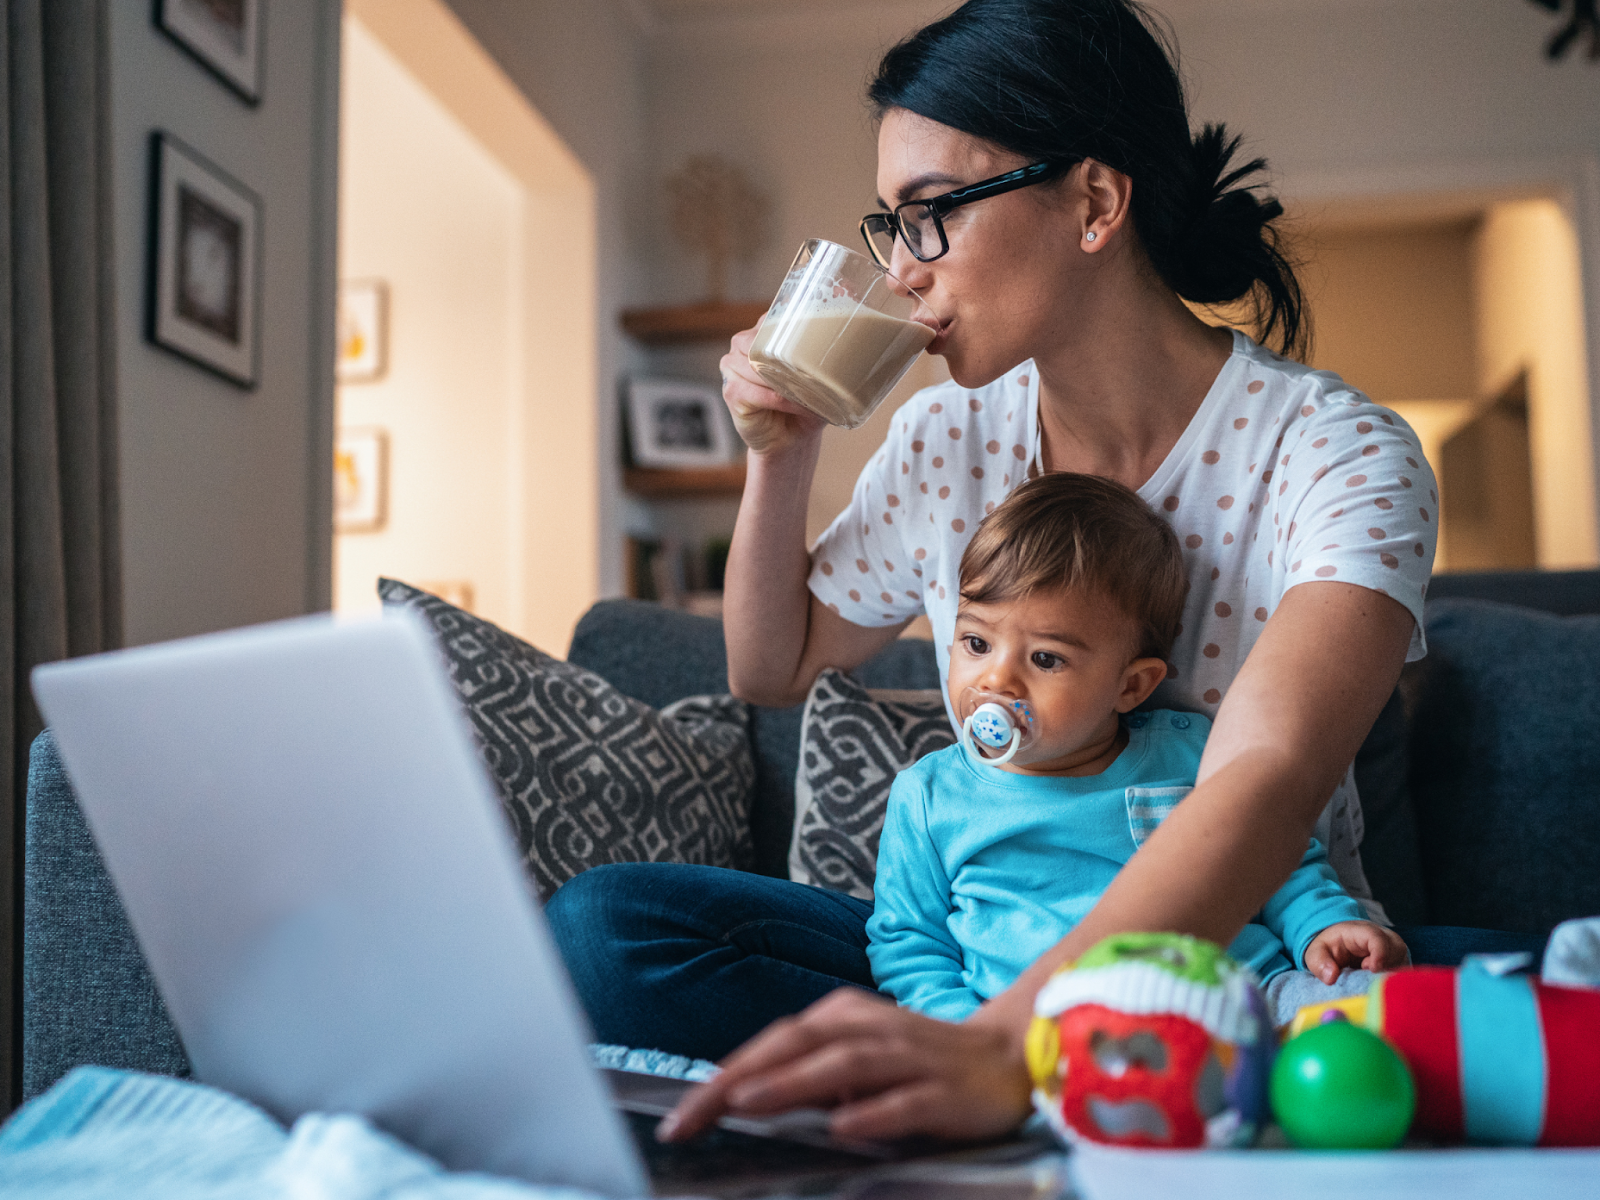 Remote working mother works while taking care of her baby